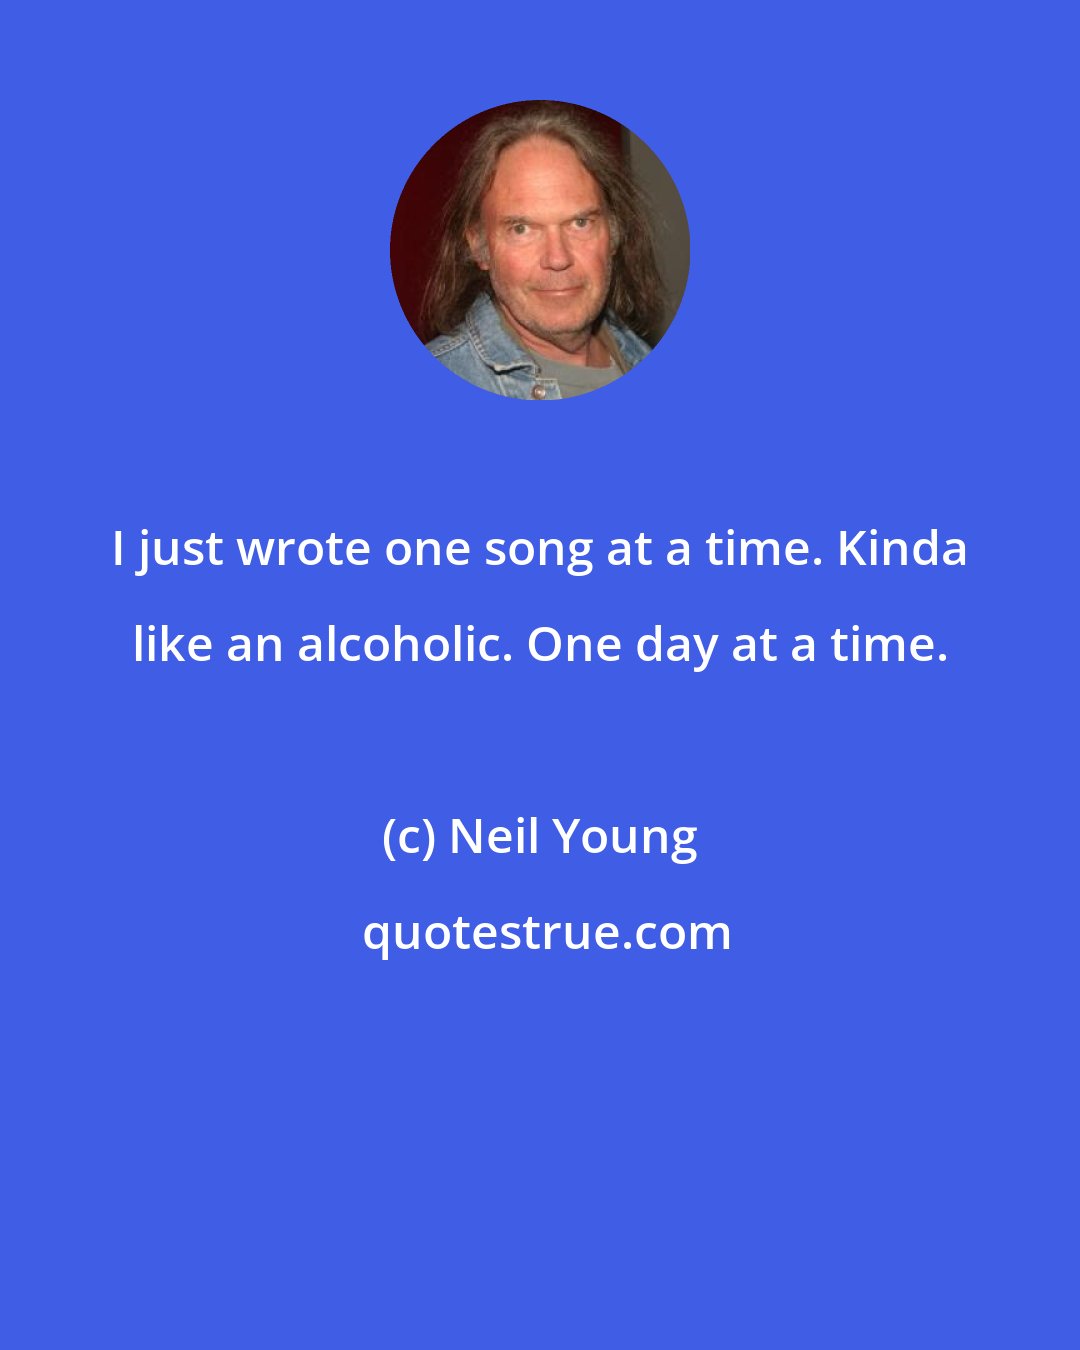 Neil Young: I just wrote one song at a time. Kinda like an alcoholic. One day at a time.